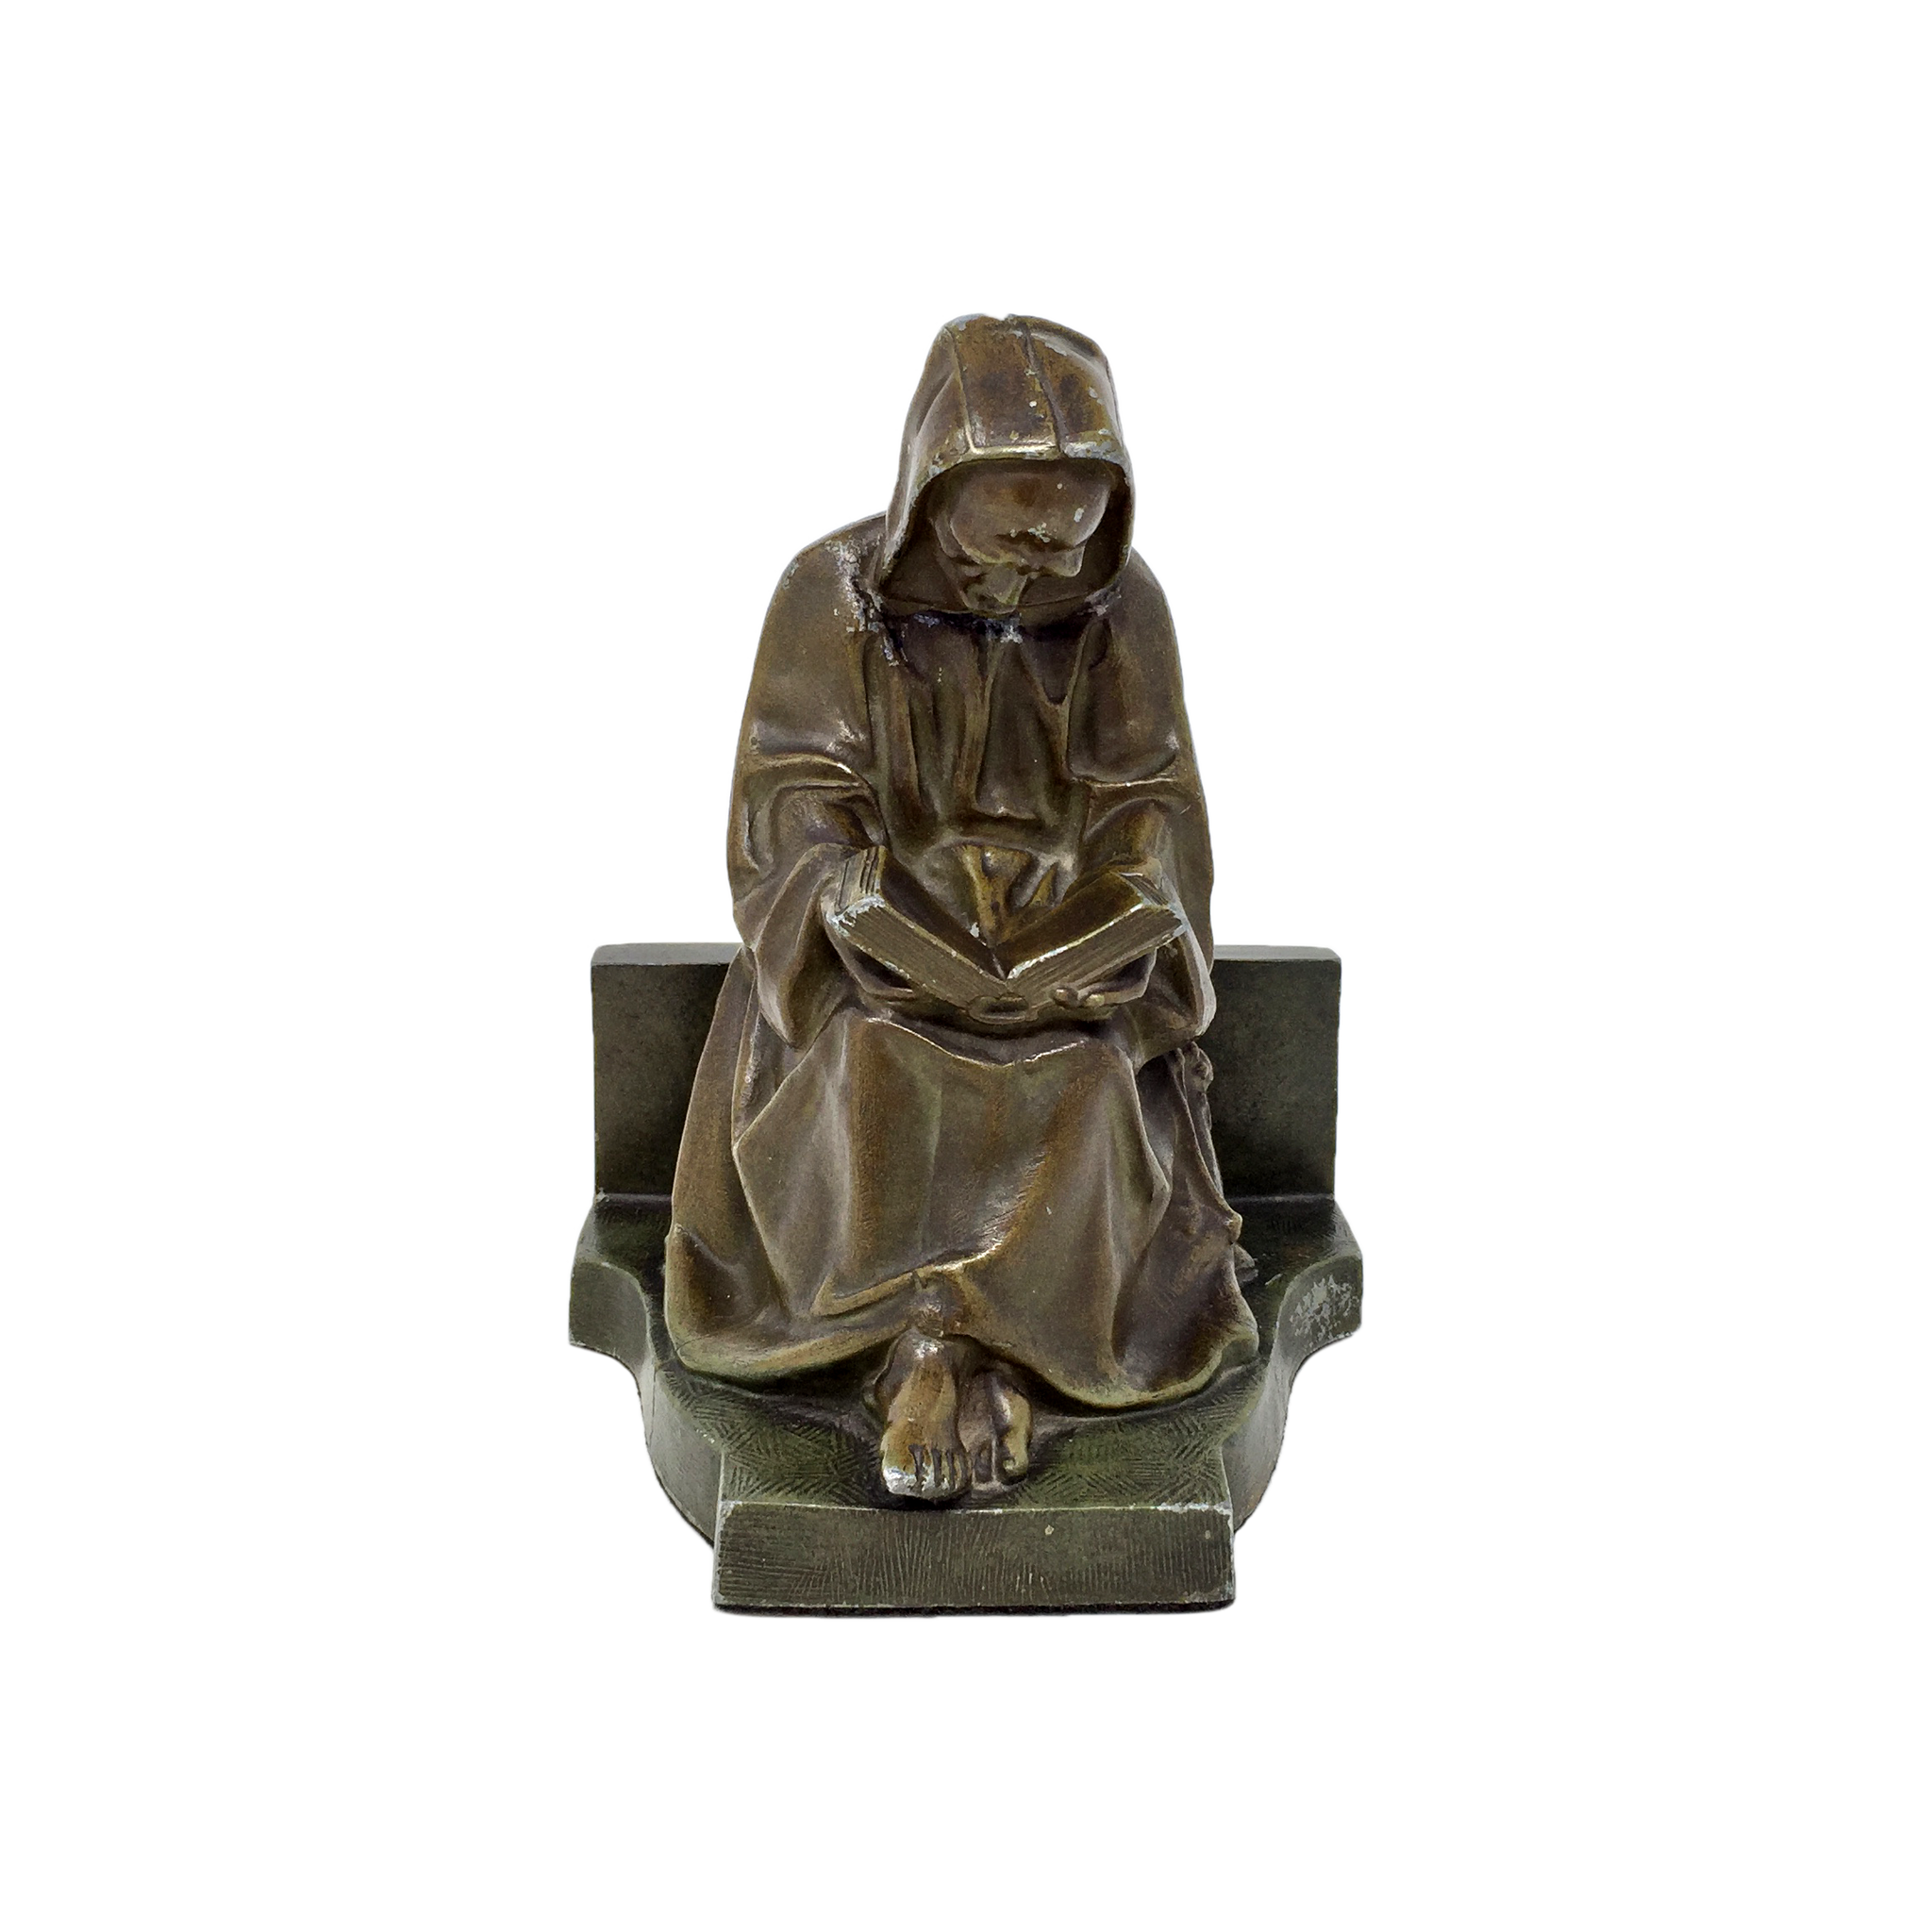 Antique mournful monk bookend by Judd circa 1925